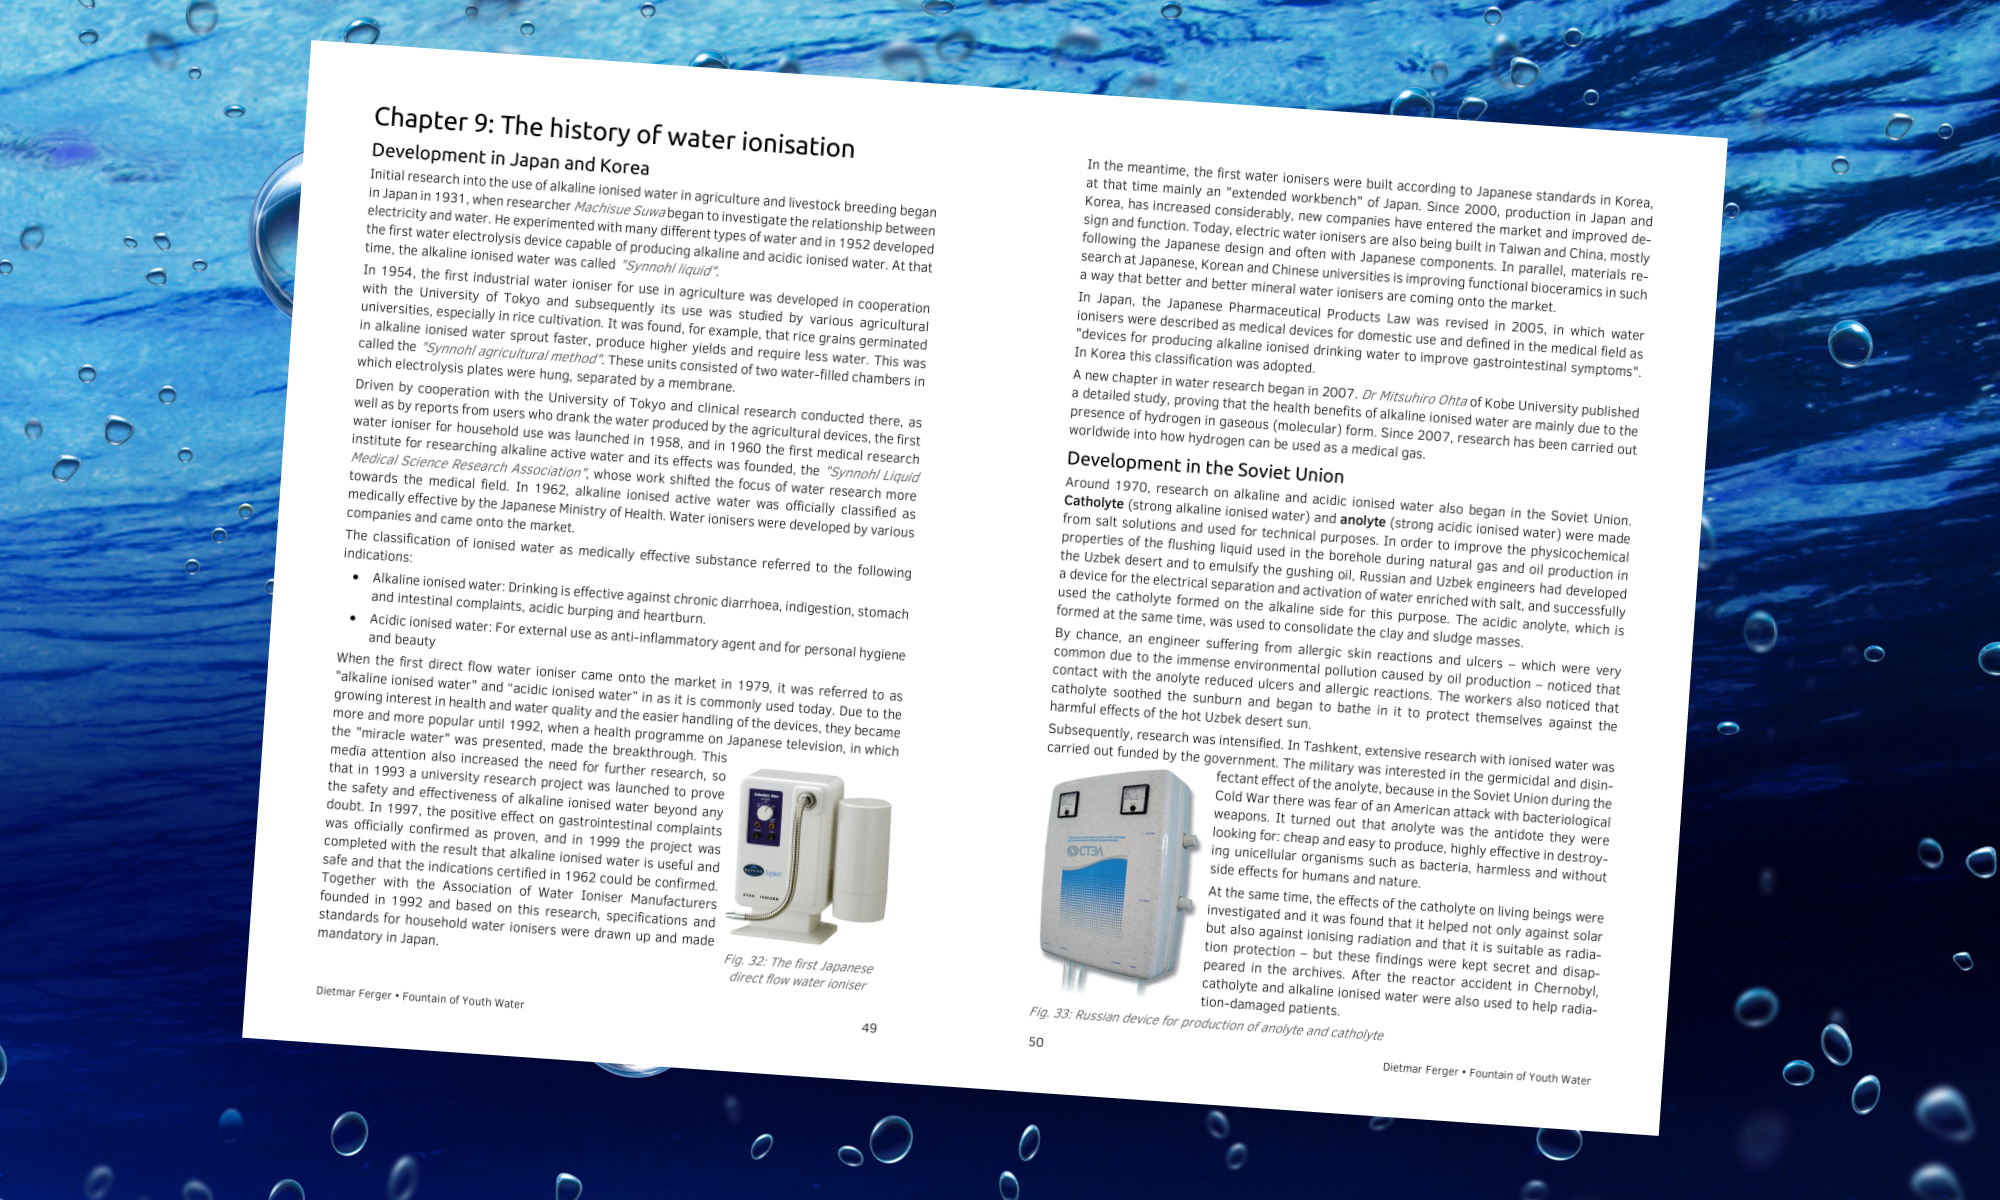 The history of water ionisation